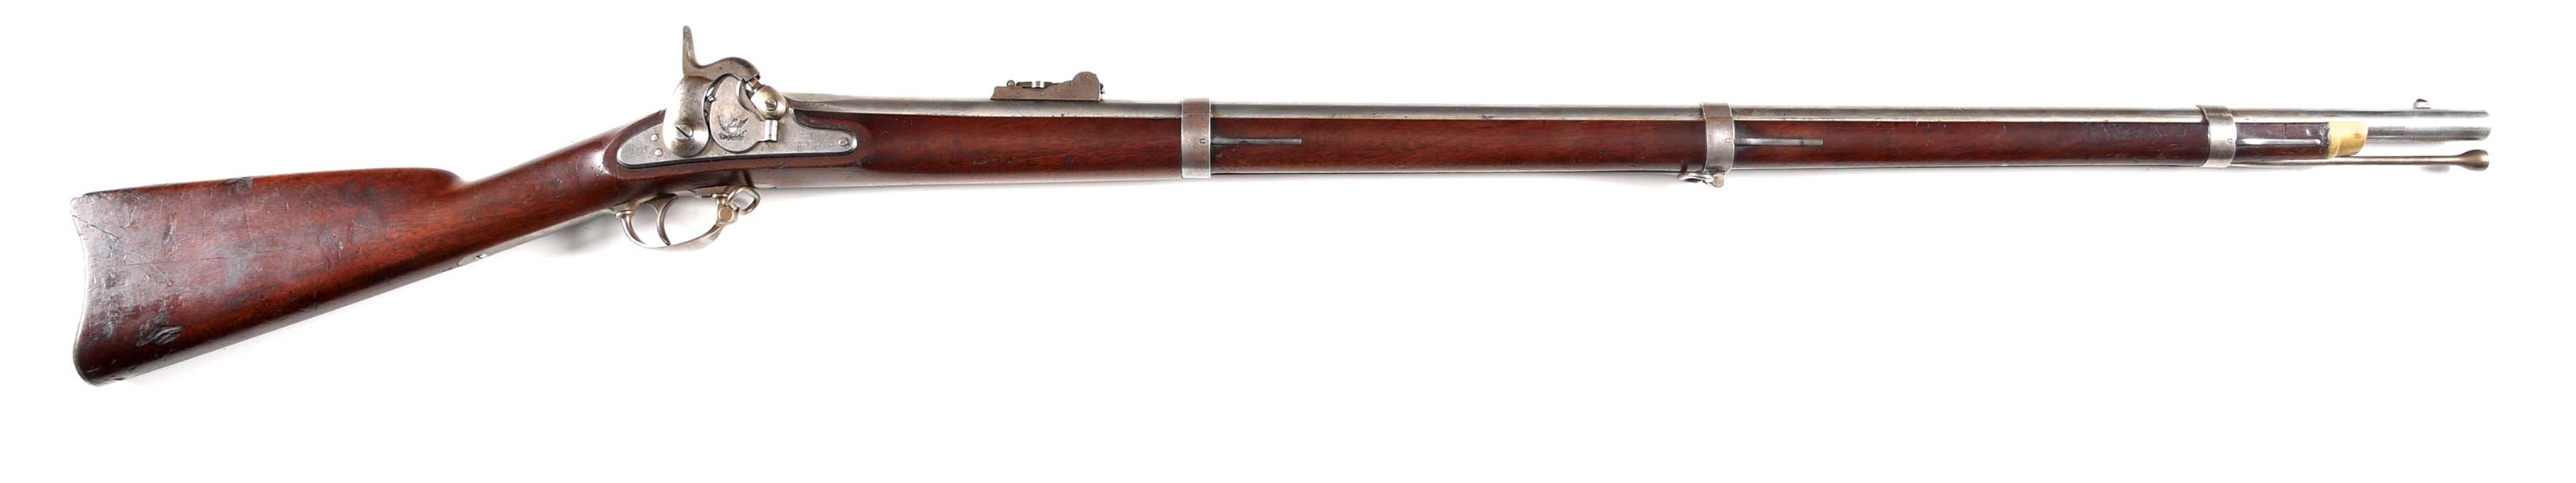 (A) US SPRINGFIELD MODEL 1855 RIFLED MUSKET DATED 1858.